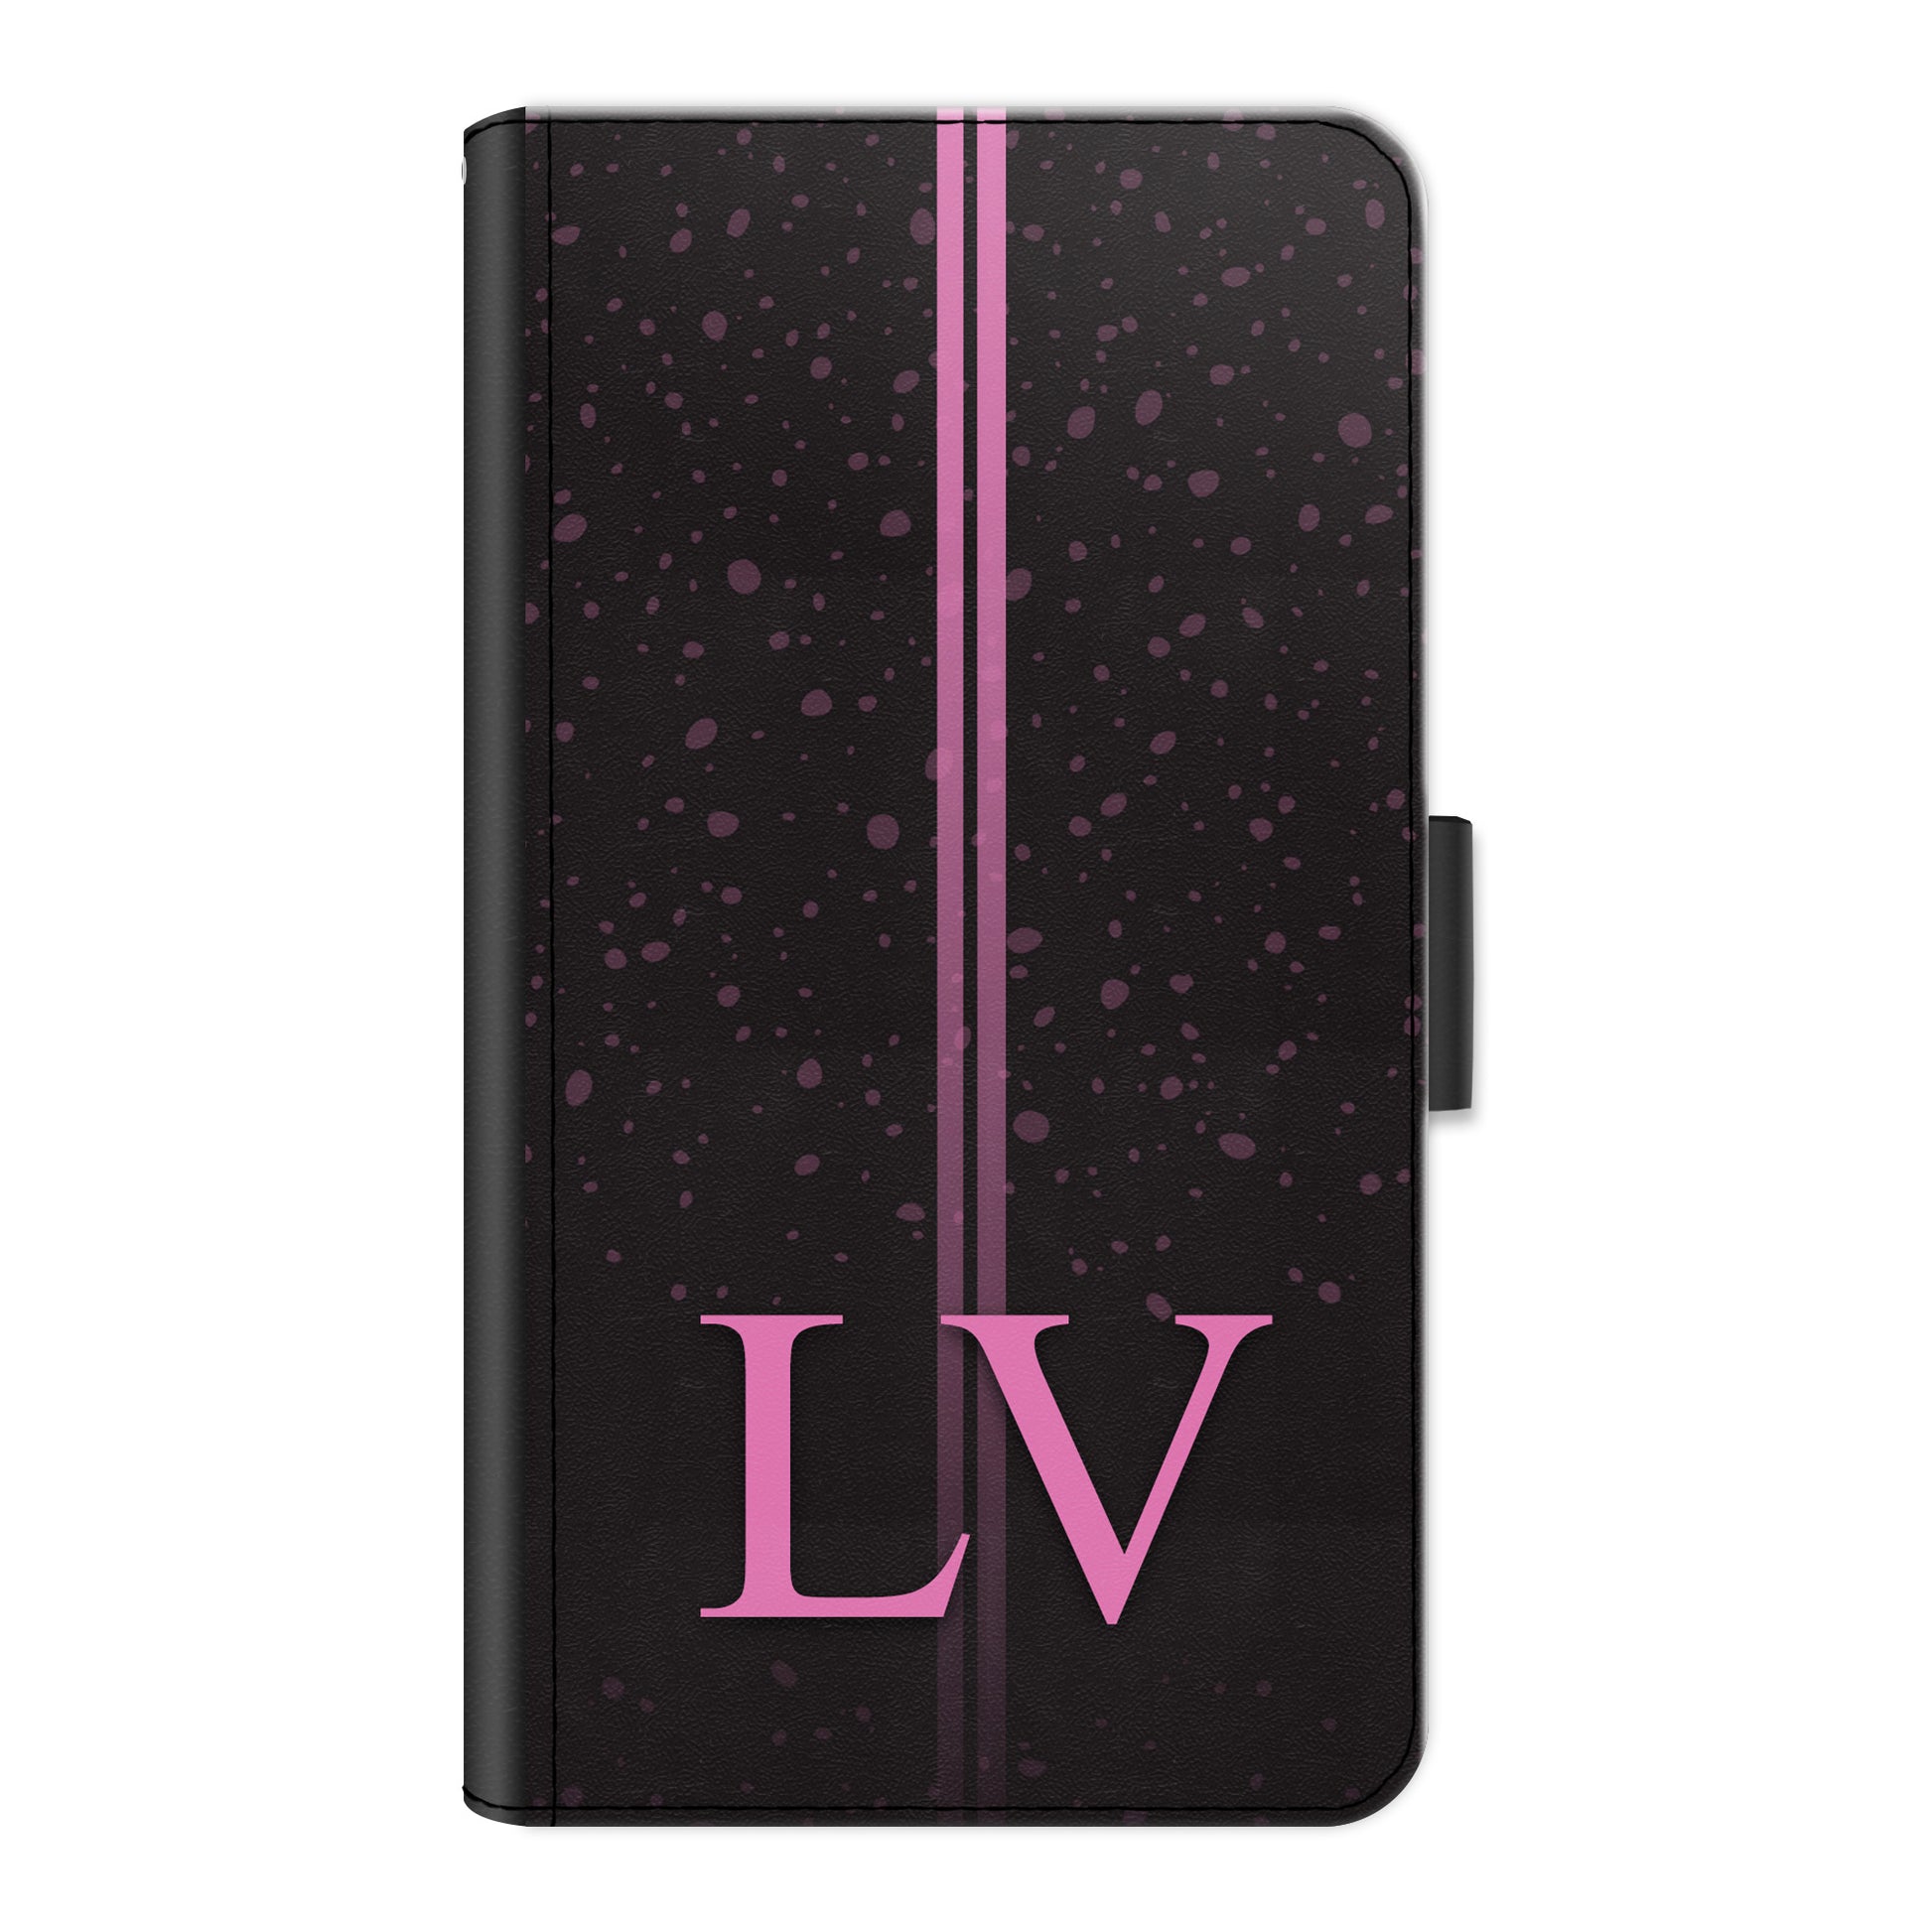 Personalised Huawei Phone Leather Wallet with Pink Initials, Pin Stripes and Droplets on Black